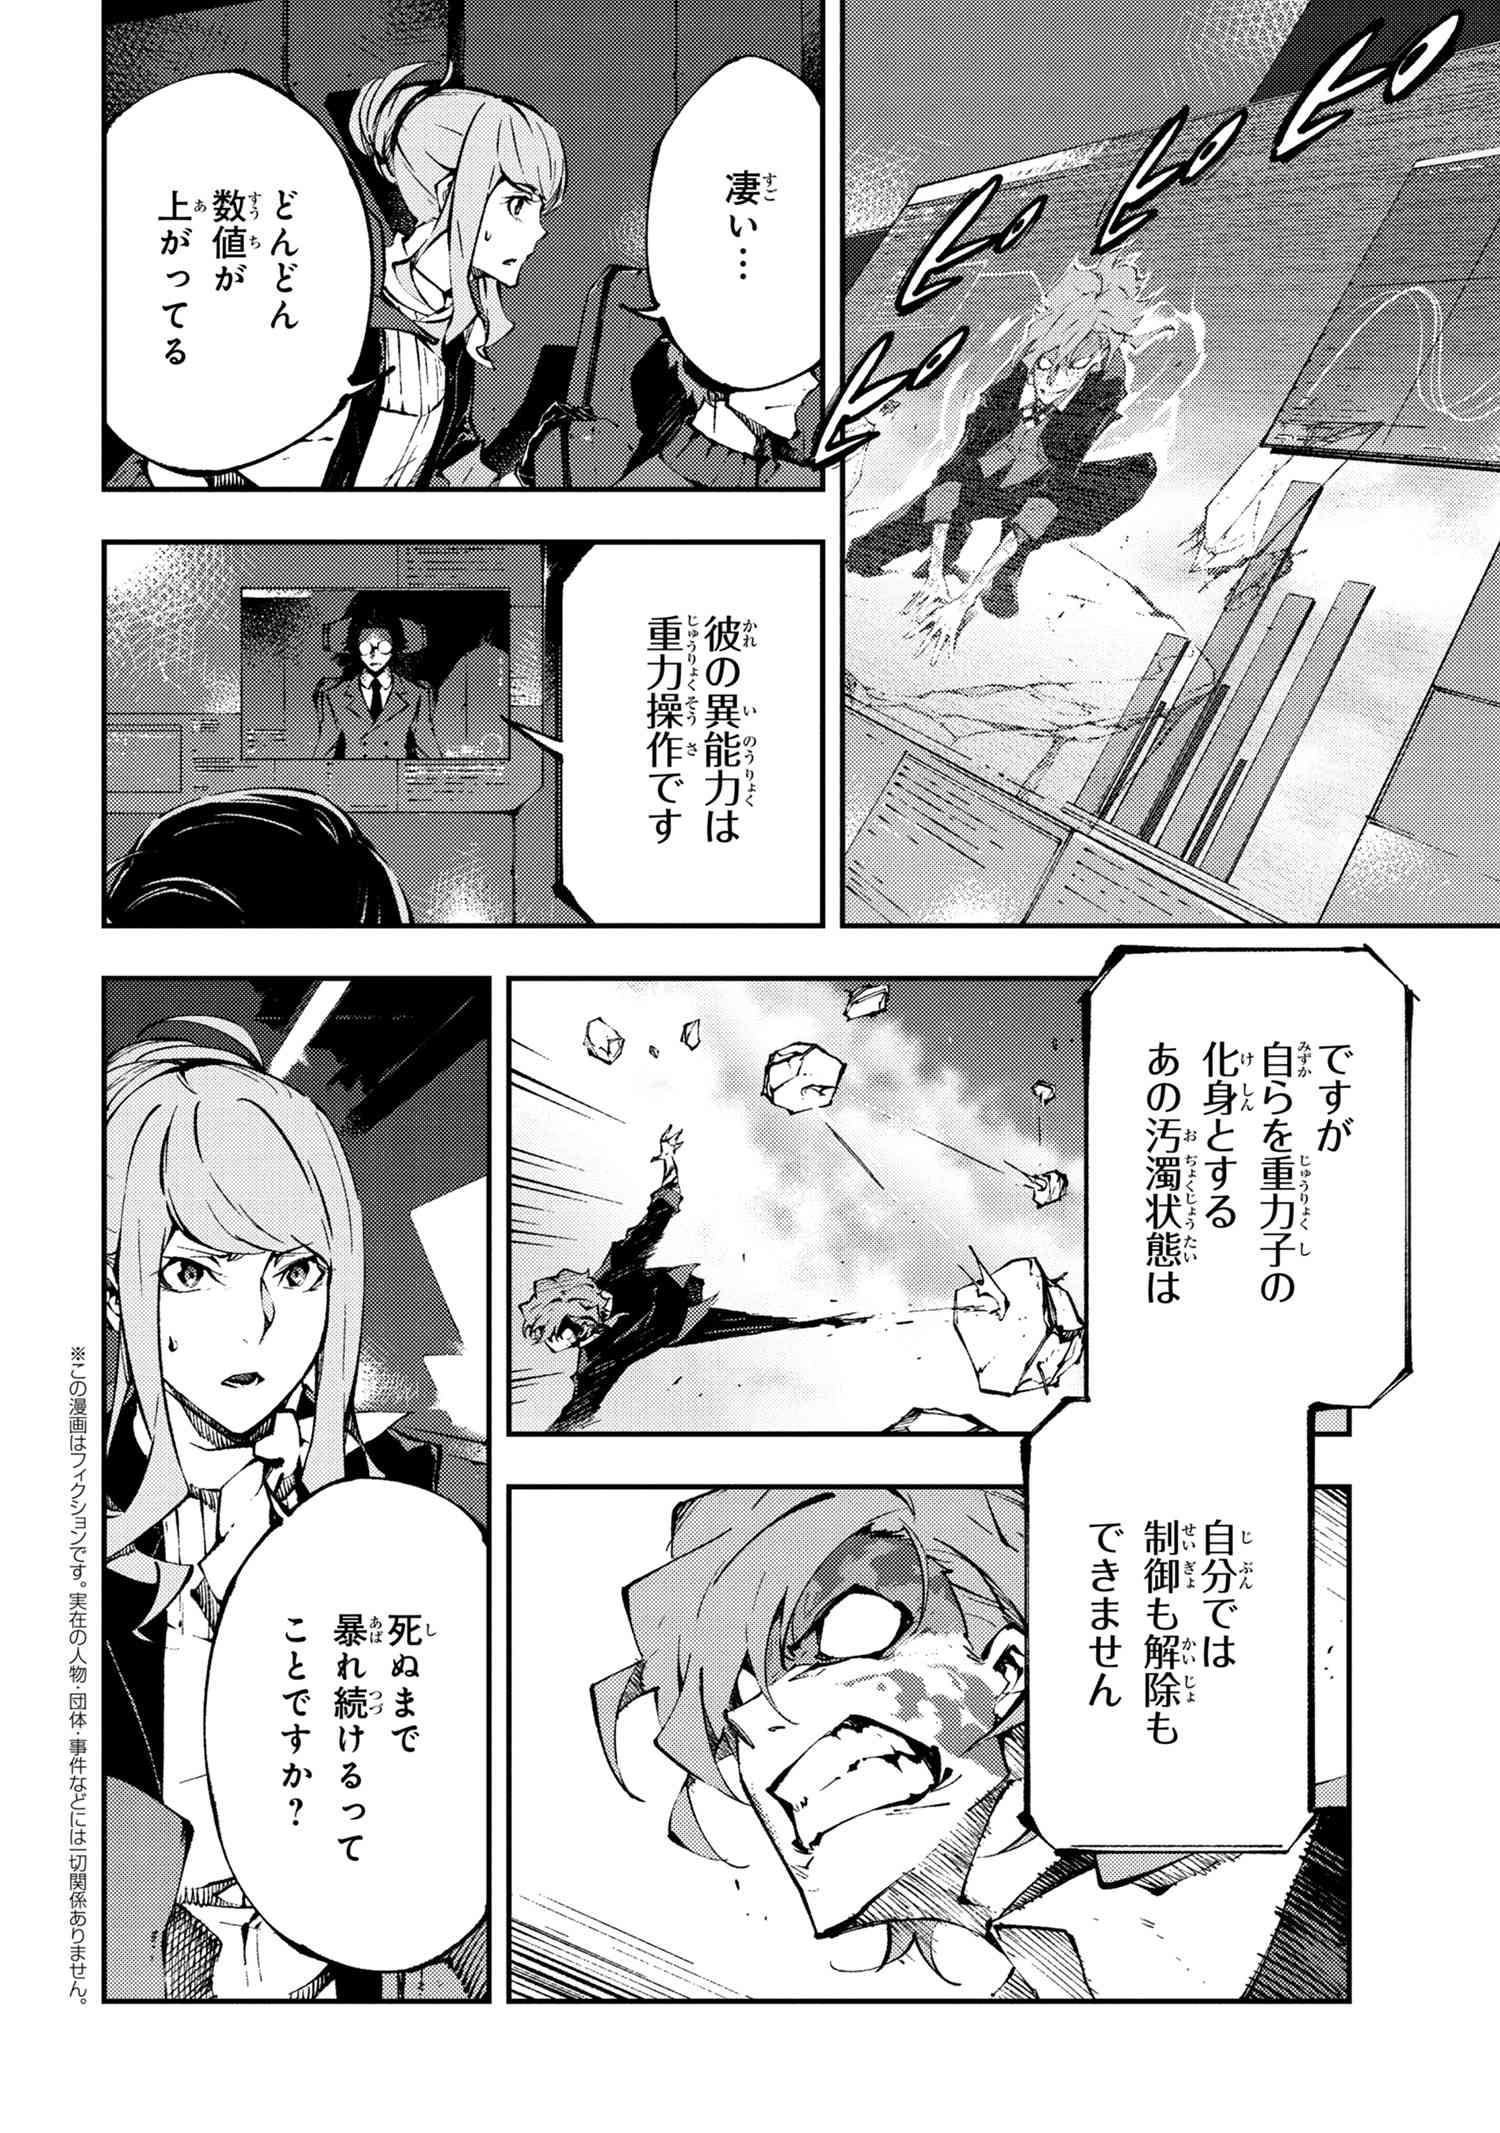 Bungou Stray Dogs: Dead Apple - Chapter 13-3 - Page 1